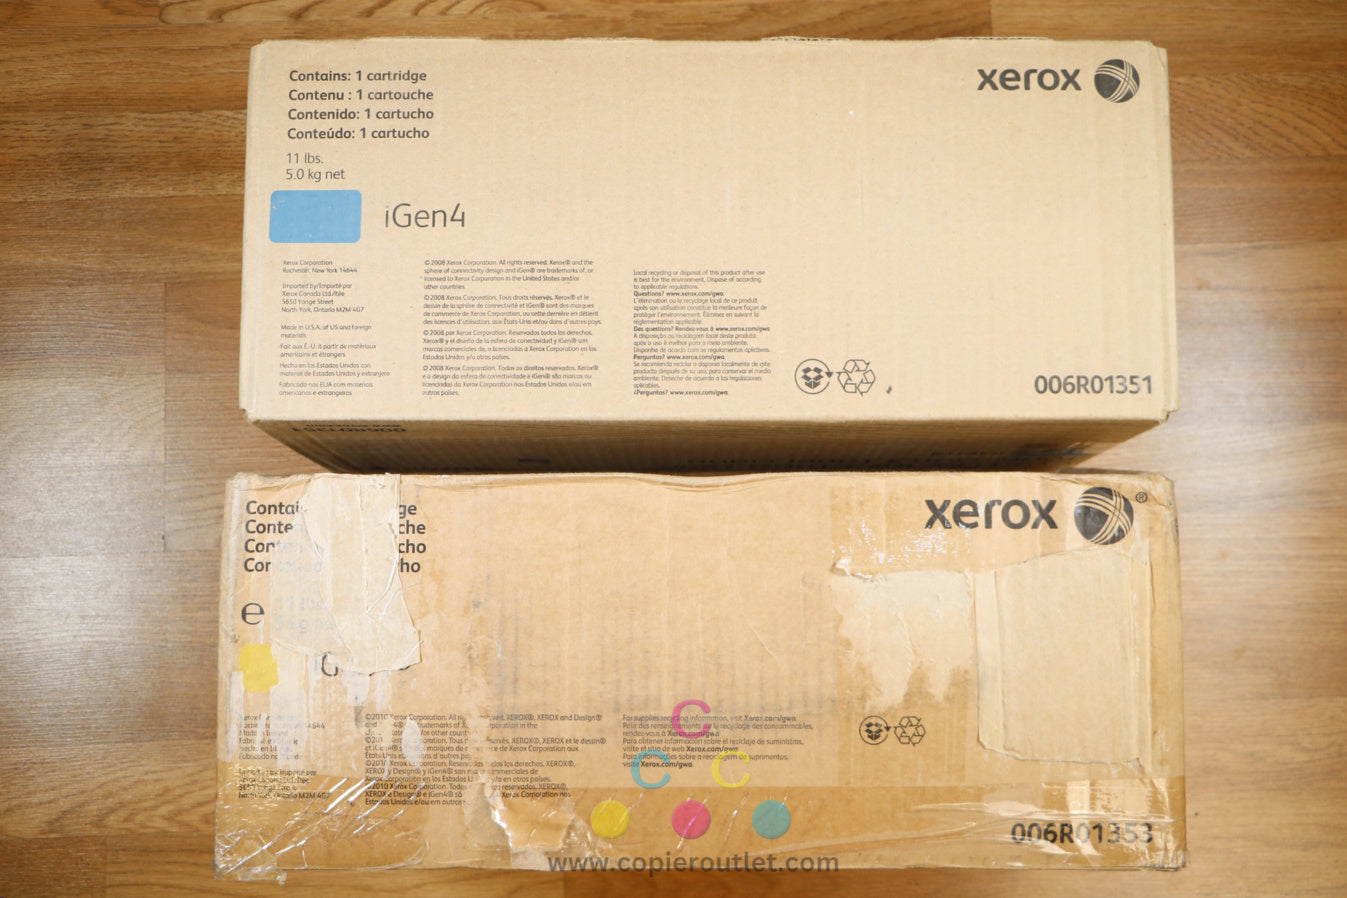 Cosmetic Genuine Xerox 006R01351 006R01353 Cyan Yellow Dry Ink Toner For iGen4 Same Say Ship